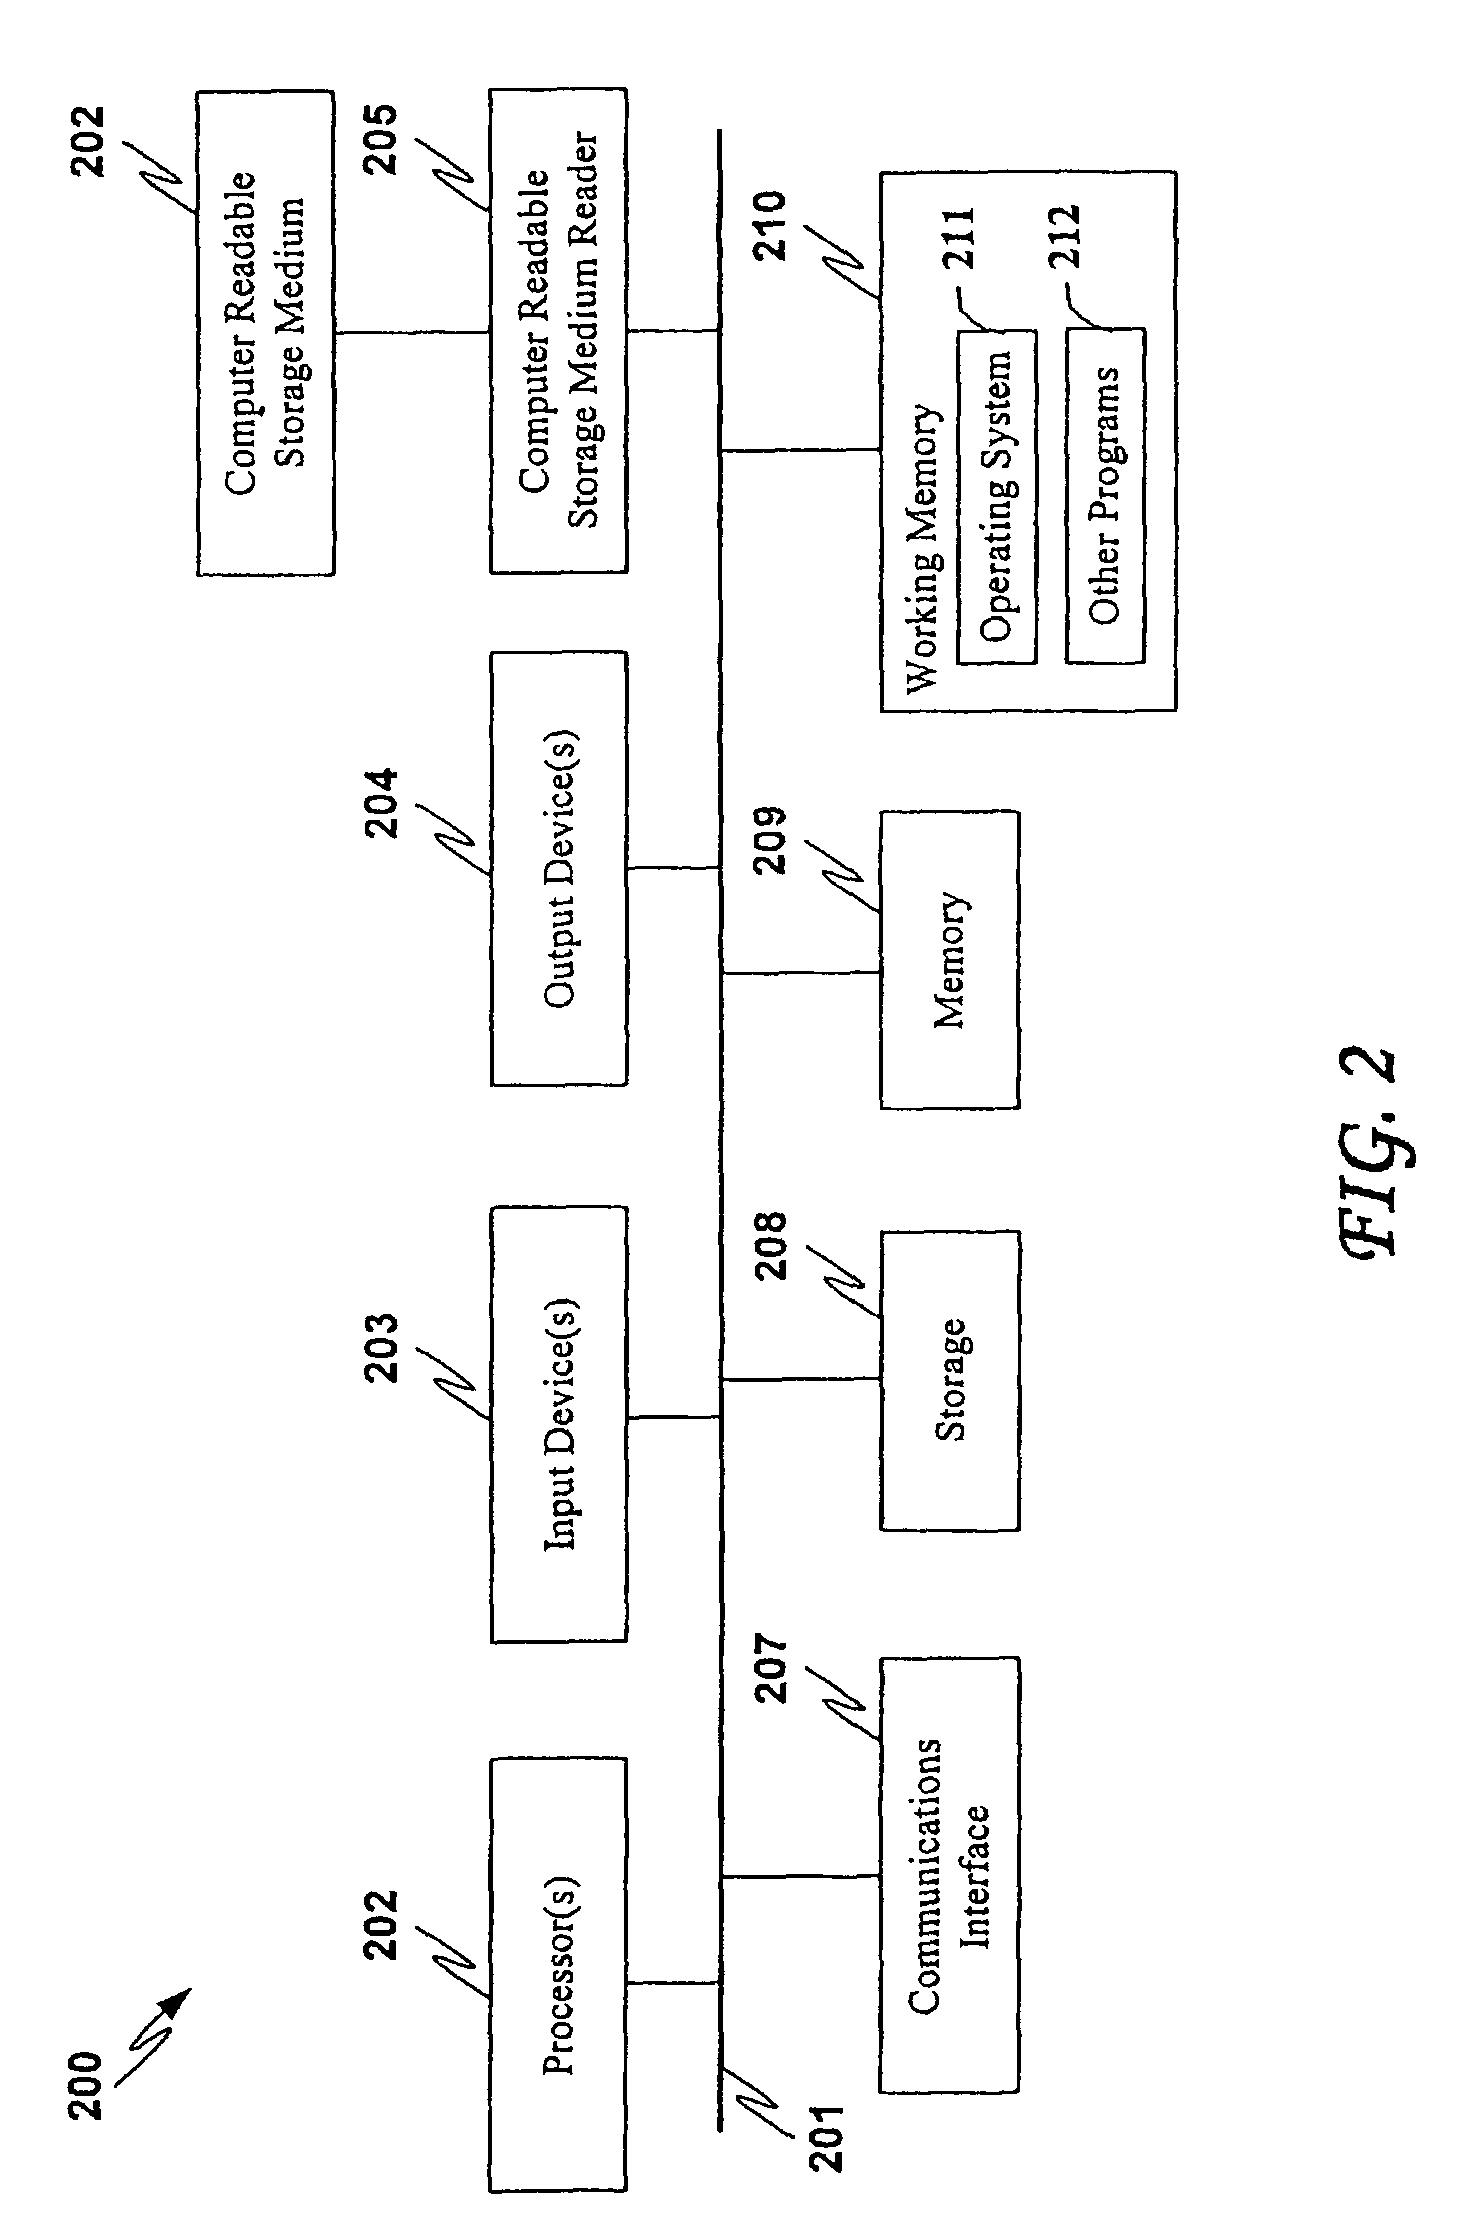 System and methods for asynchronous synchronization